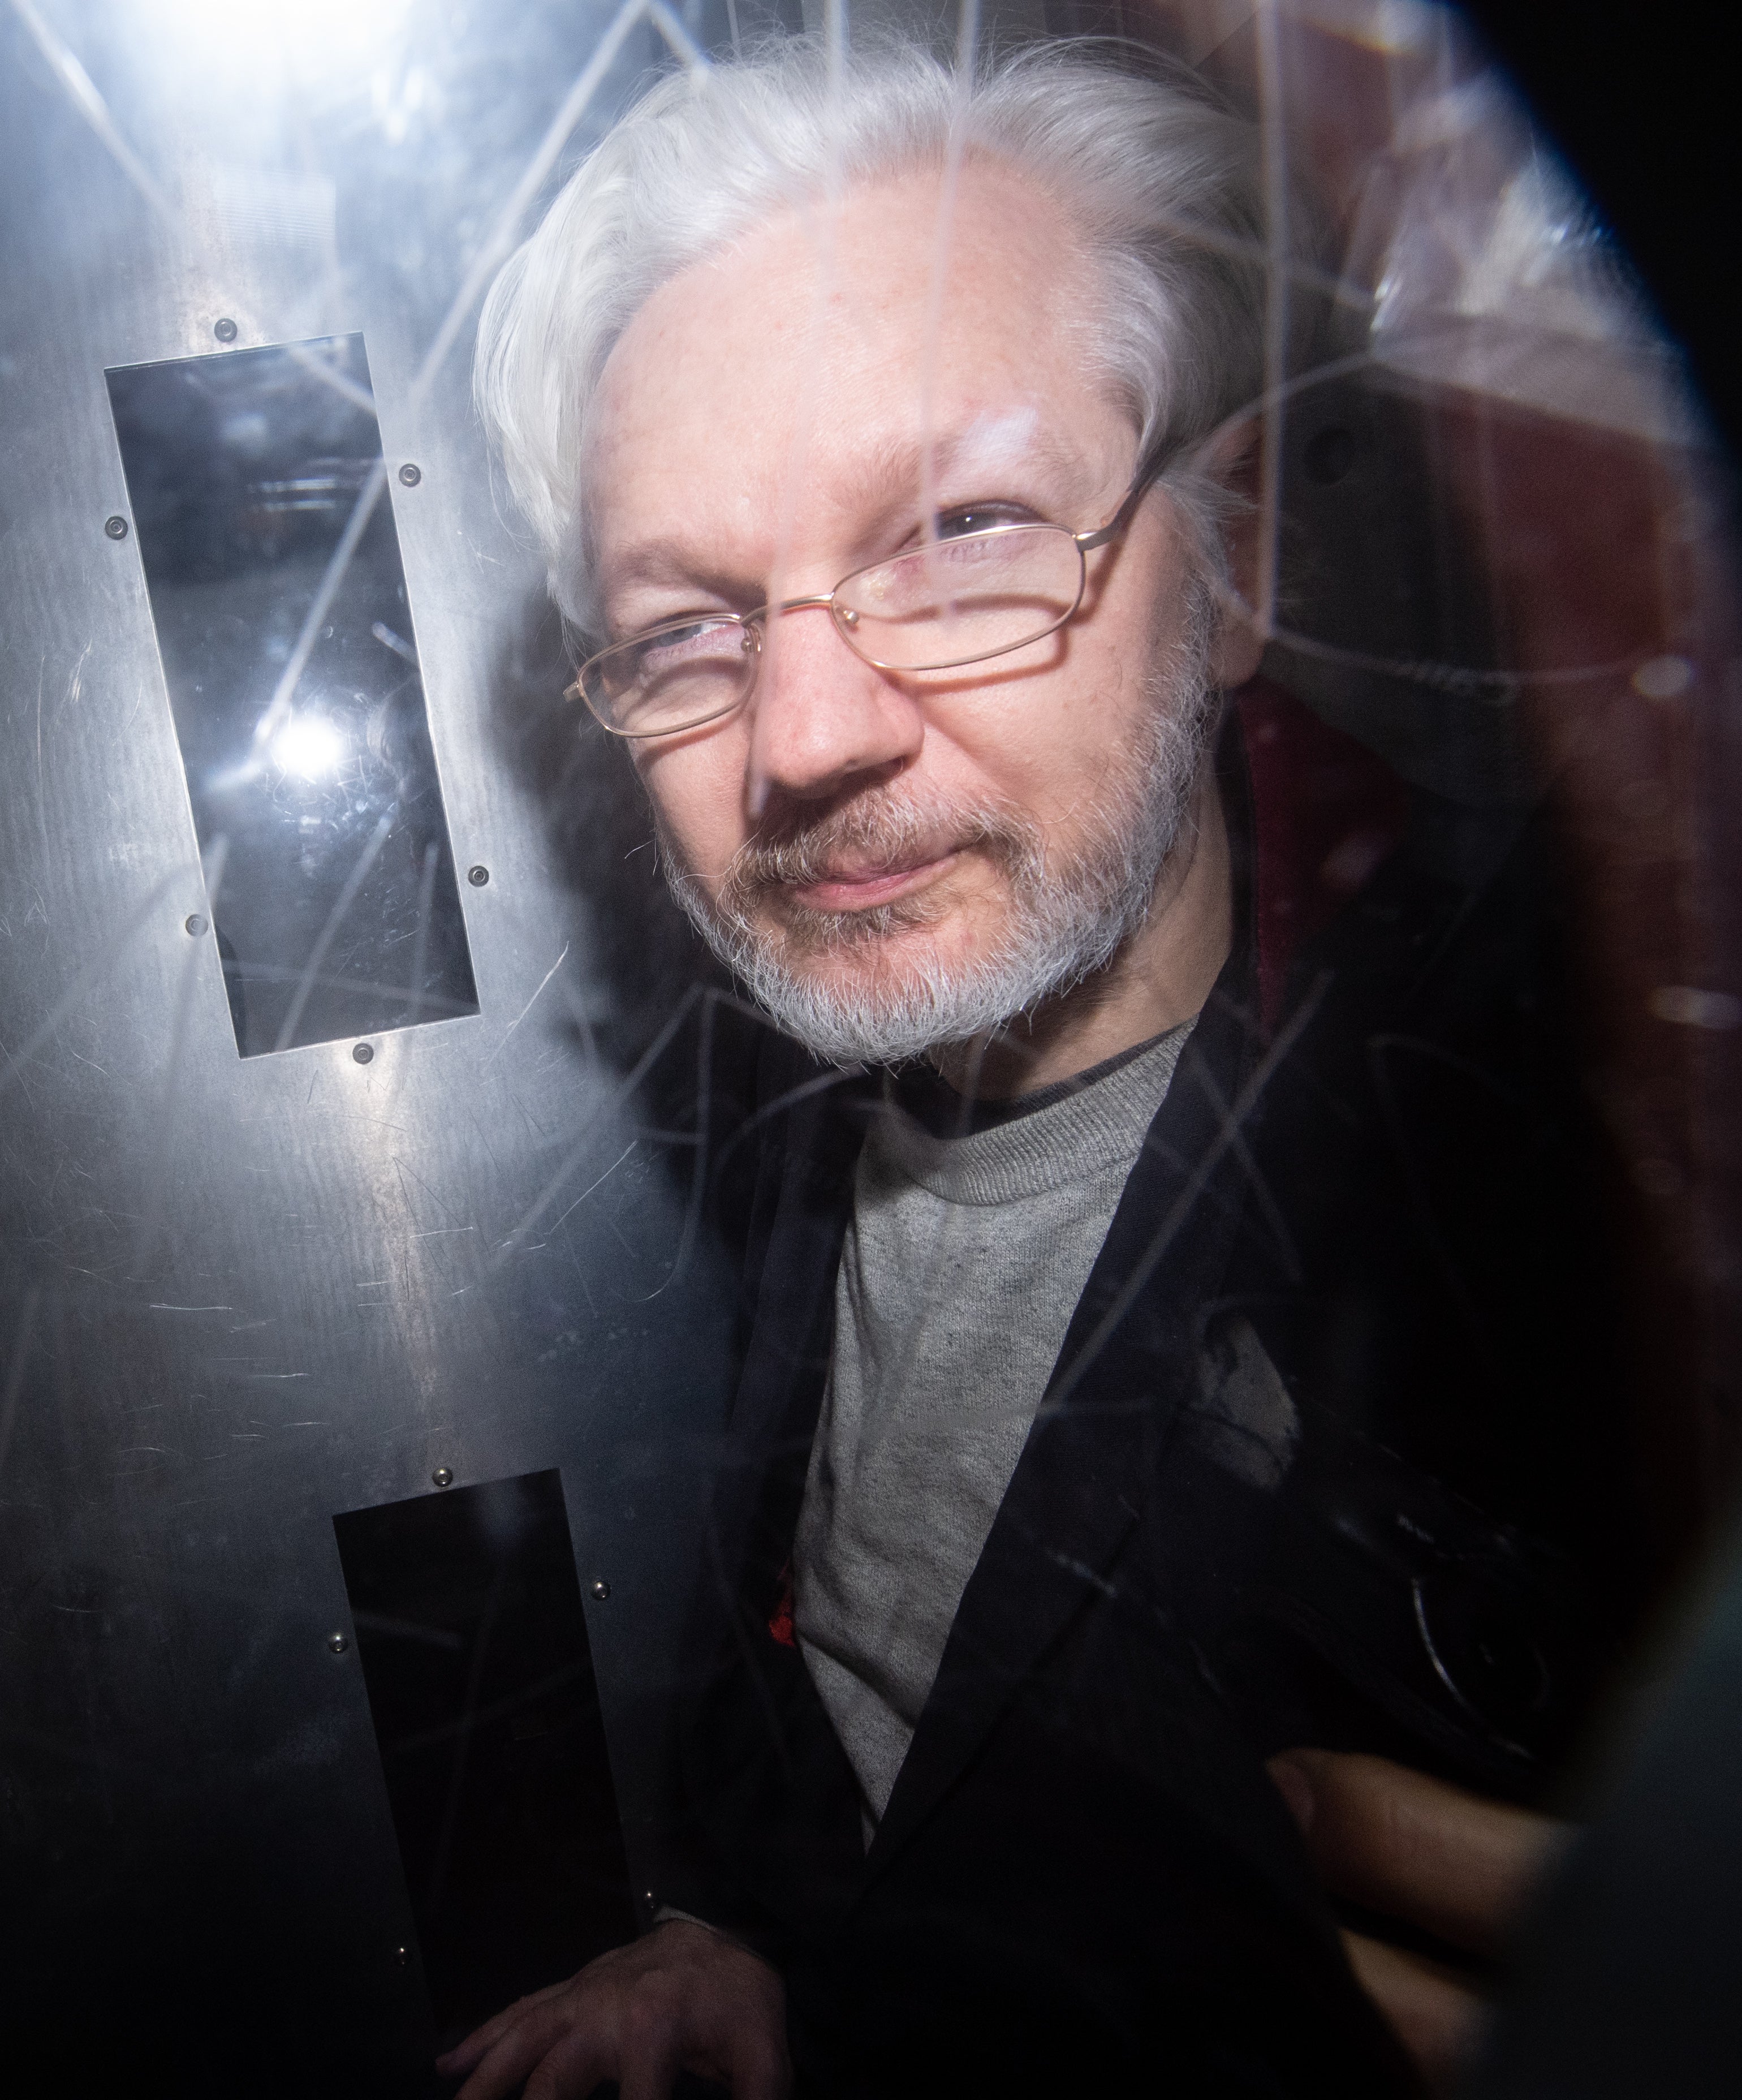 Australia’s Deputy Prime Minister has come to the defence of WikiLeaks founder Julian Assange, calling on the UK not to extradite the Australian citizen to the US (Dominic Lipinski/PA)